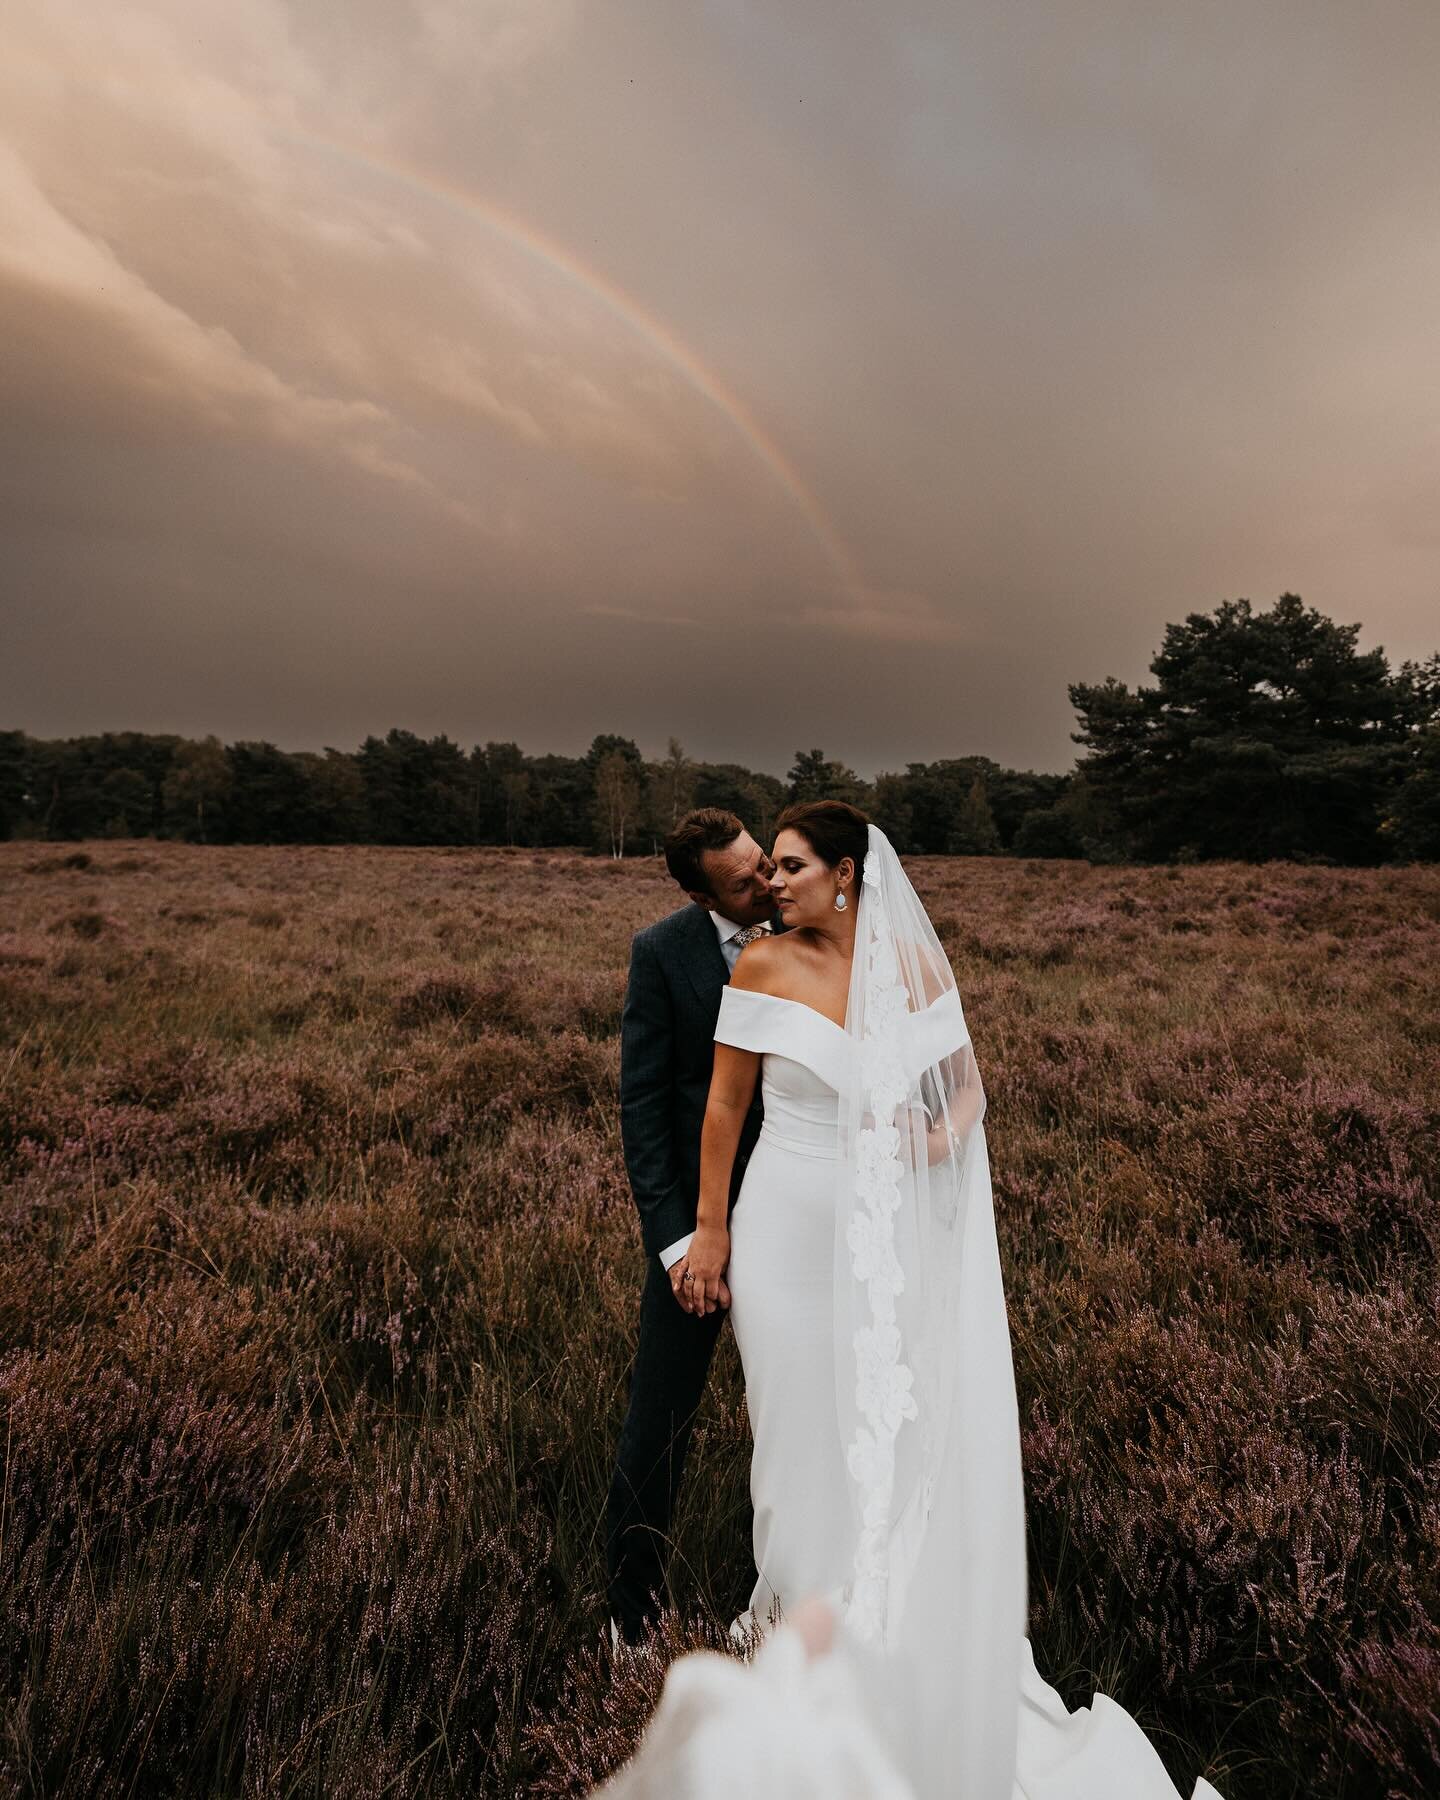 A rainbow during the golden hour photo shoot 🌈
⠀⠀⠀⠀⠀⠀⠀⠀⠀
By now I have had quite a few photo shoots but never before have I seen a rainbow during golden hour. How special is that?
⠀⠀⠀⠀⠀⠀⠀⠀⠀
@Royvanderwens
@huizedruivelaar
@wildatheartbridal
@MadeWit